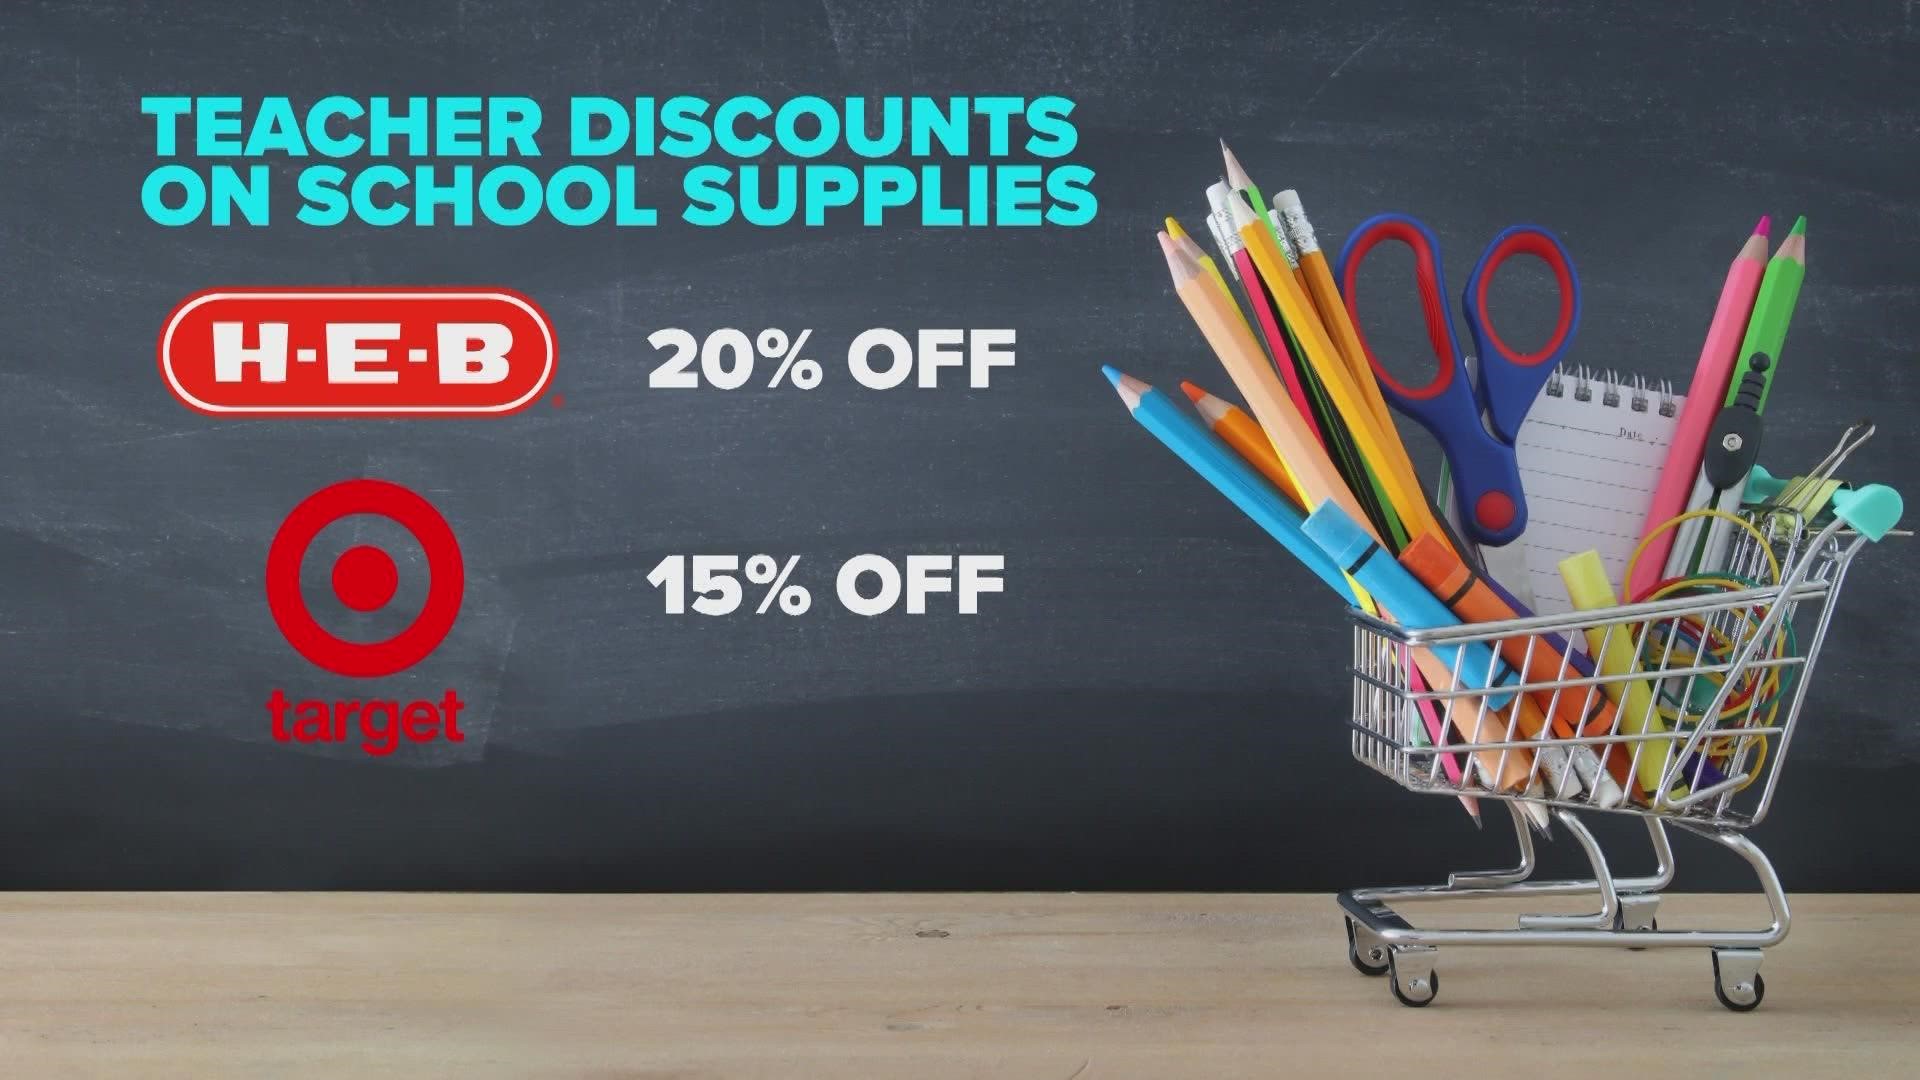 Teachers can get these discounts on top of the sales that are already happening!